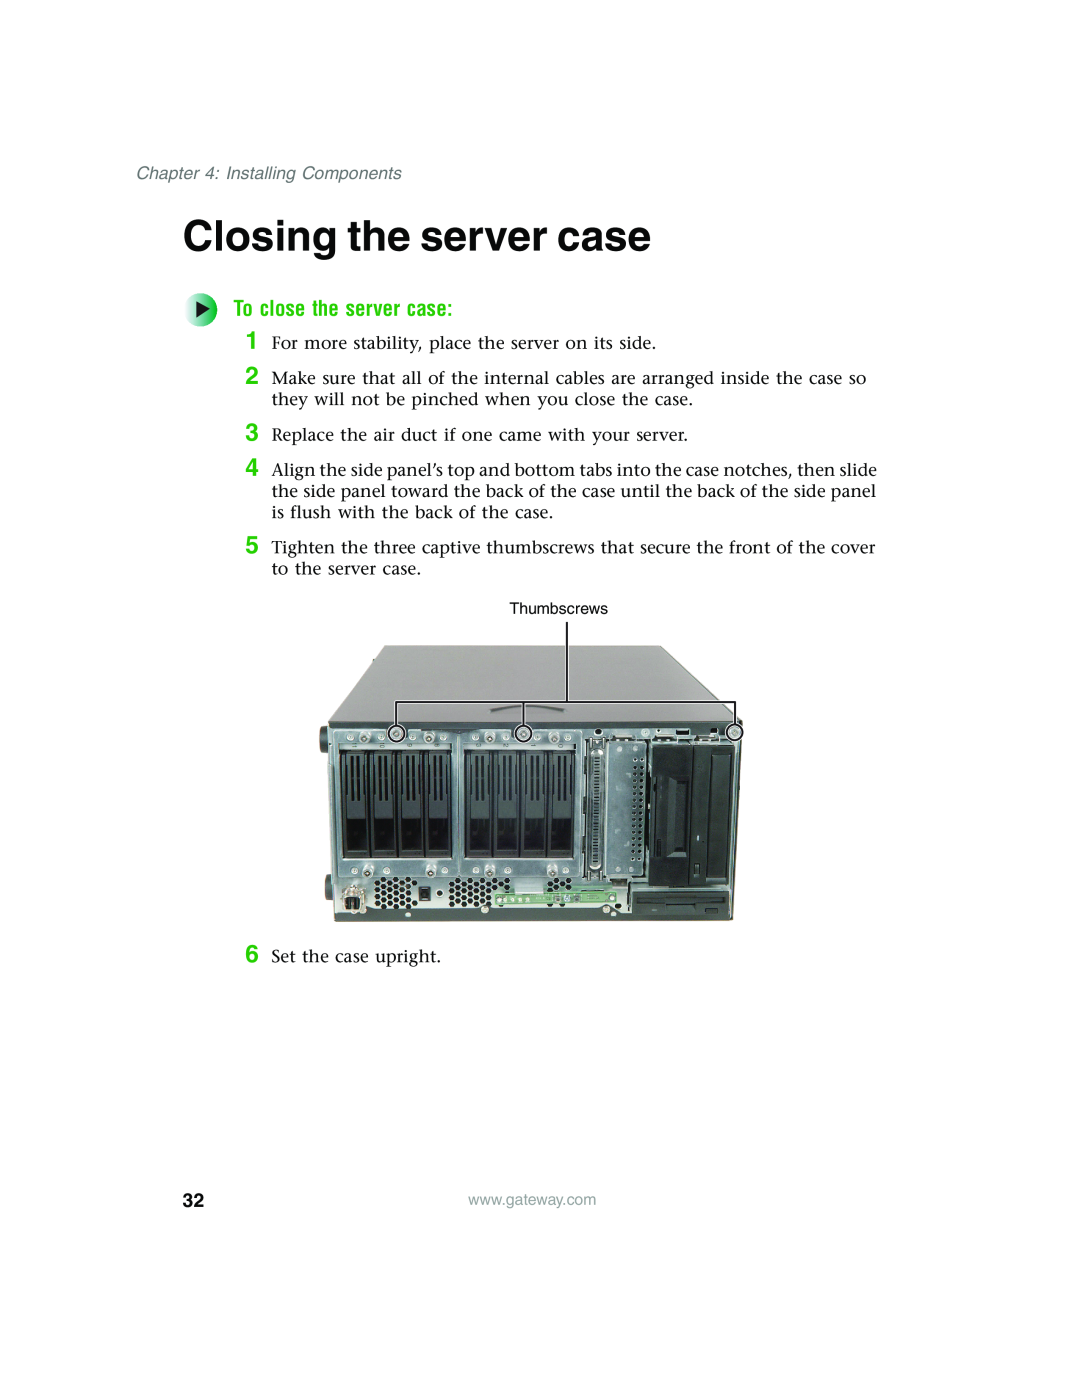 Gateway 980 manual Closing the server case, To close the server case, Installing Components 